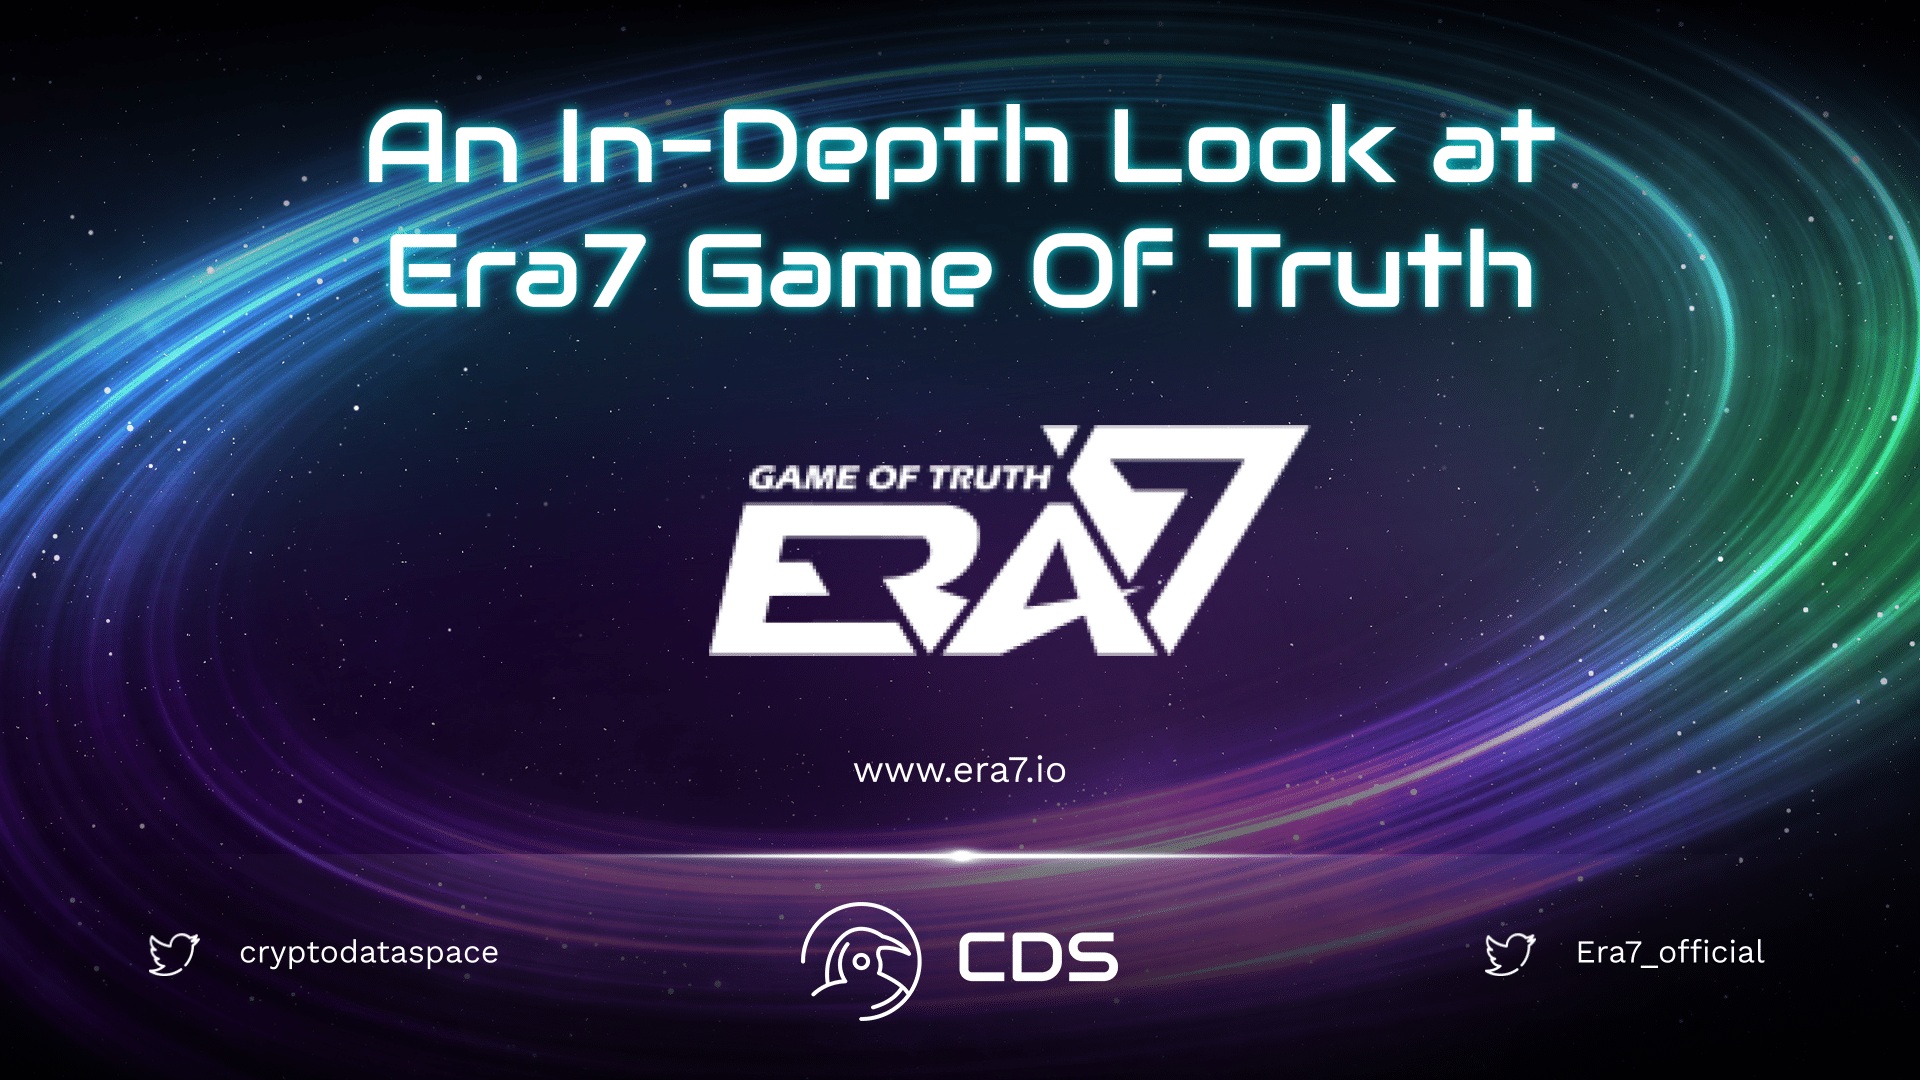 An In-Depth Look at Era7 Game Of Truth